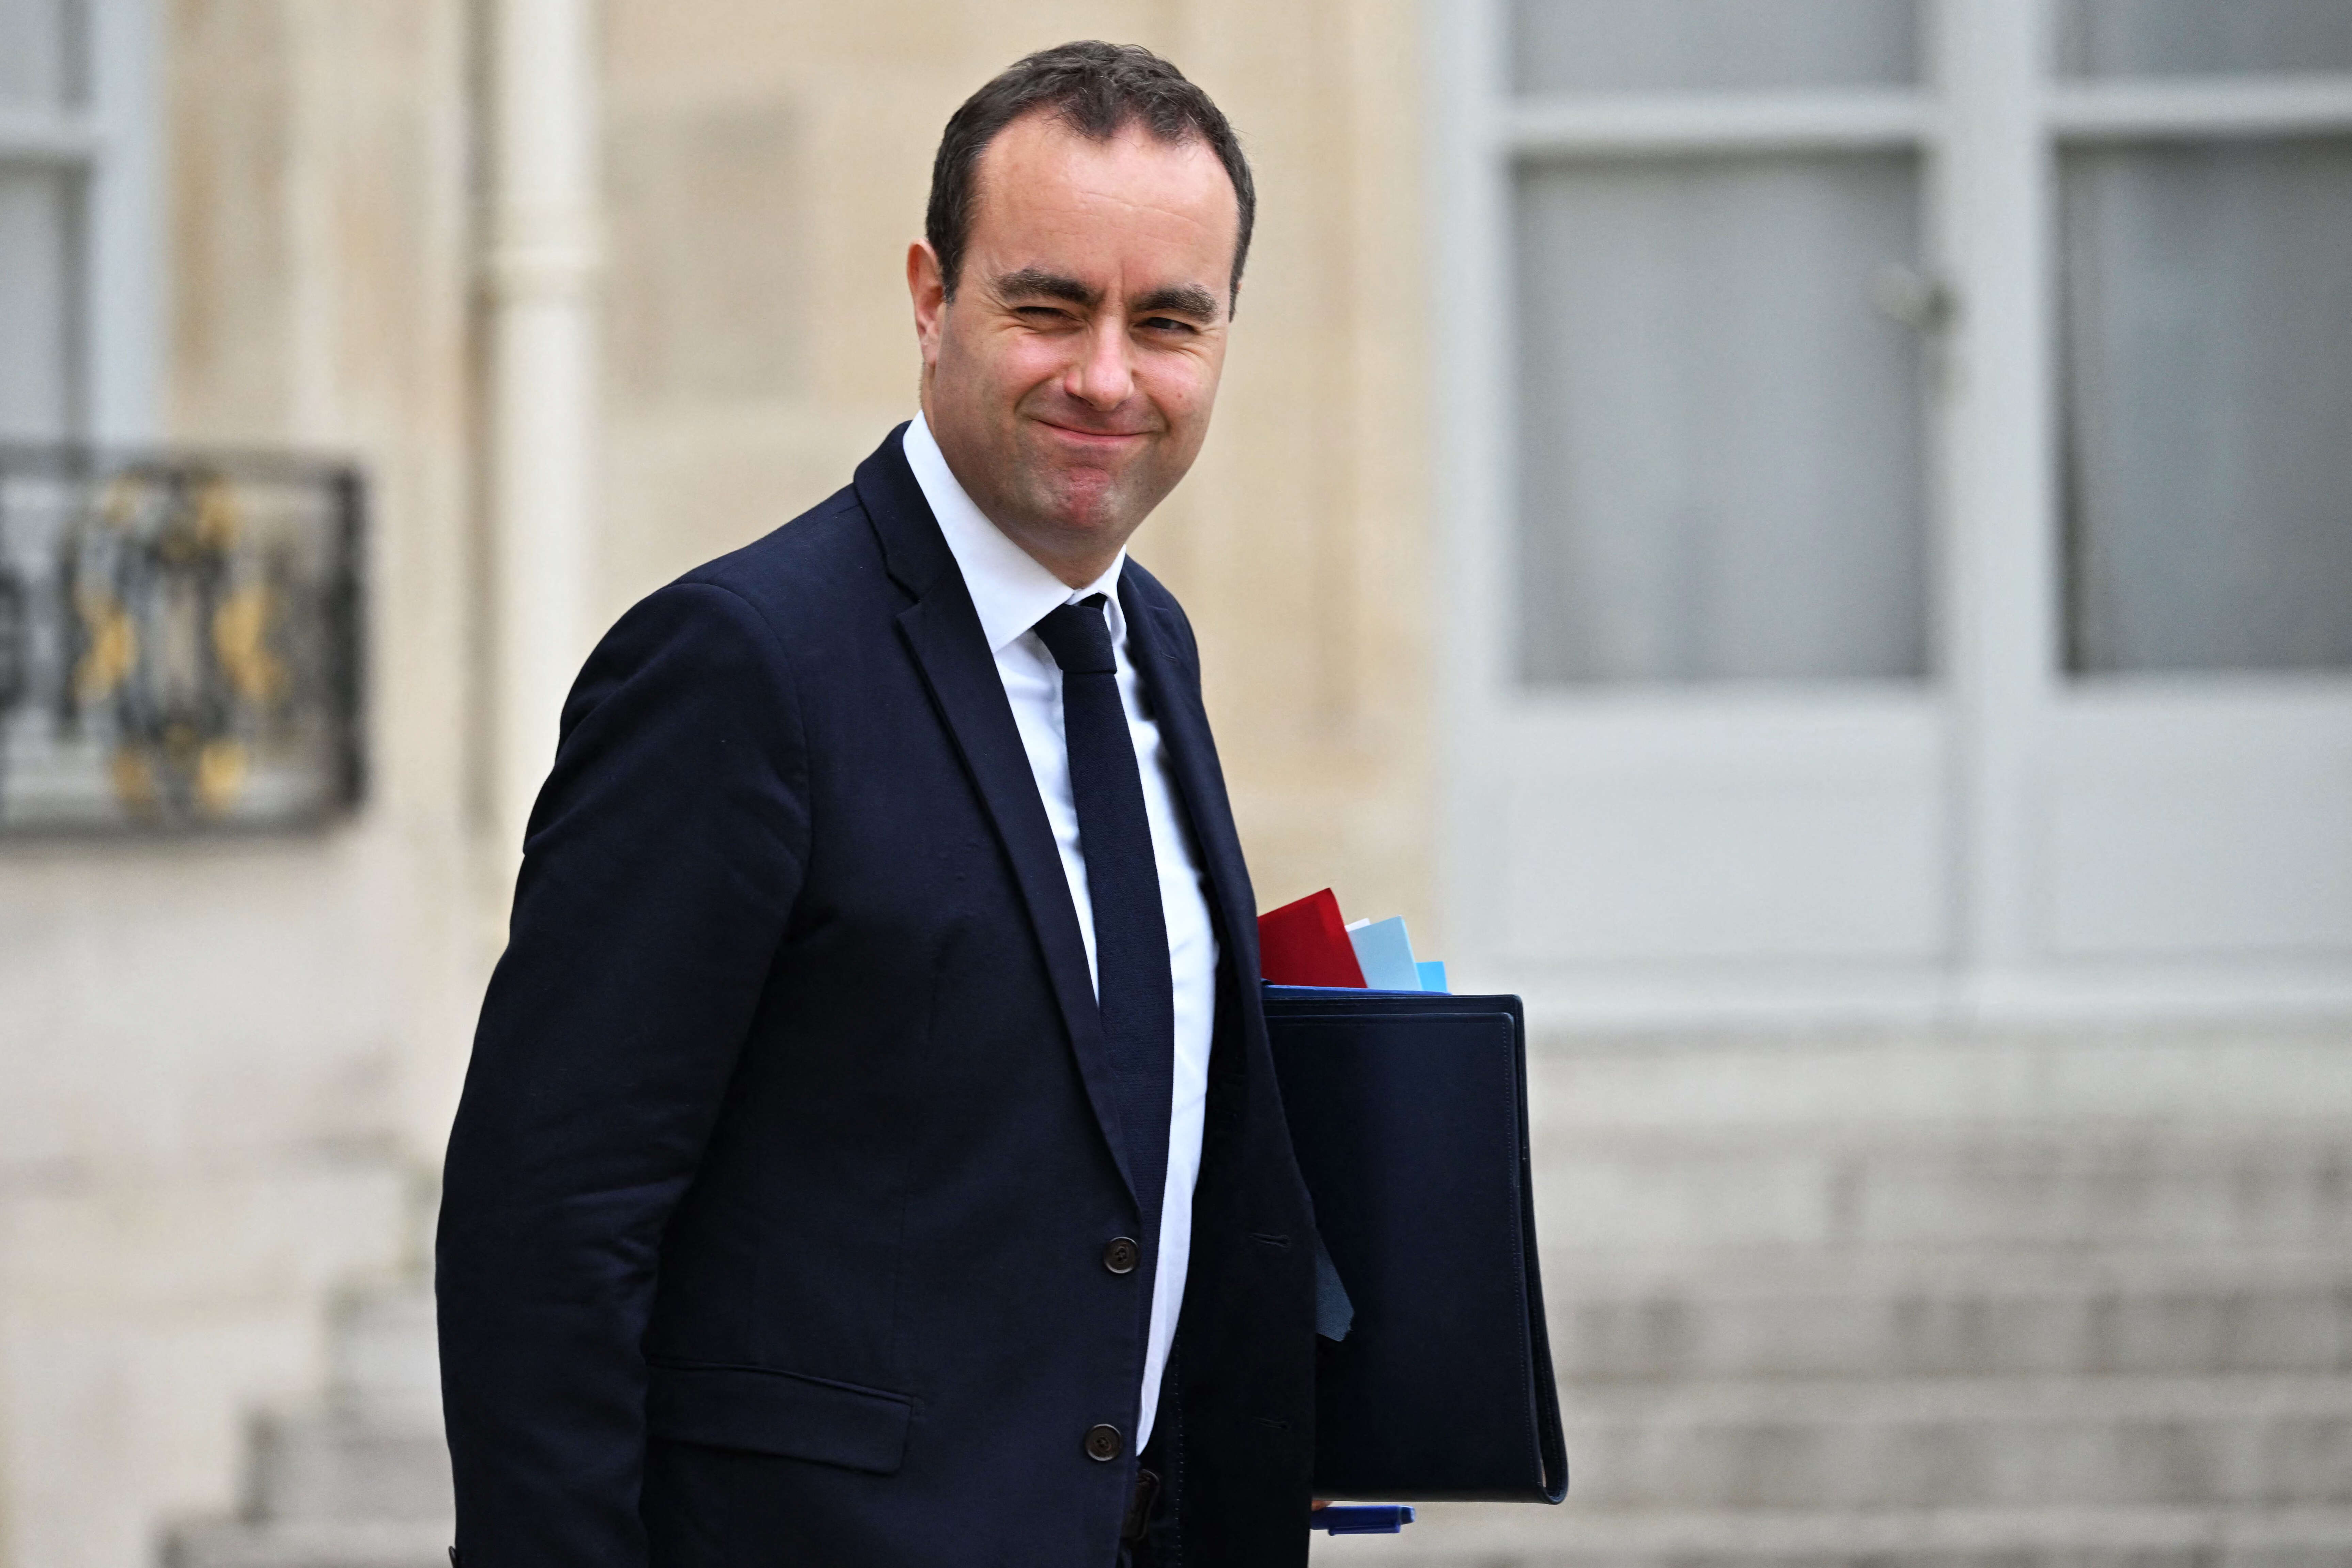 French Armies Minister Sebastien Lecornu leaves after the weekly cabinet meeting at the presidential Elysee Presidential Palace in Paris on November 29, 2022. (Photo by Emmanuel DUNAND / AFP)